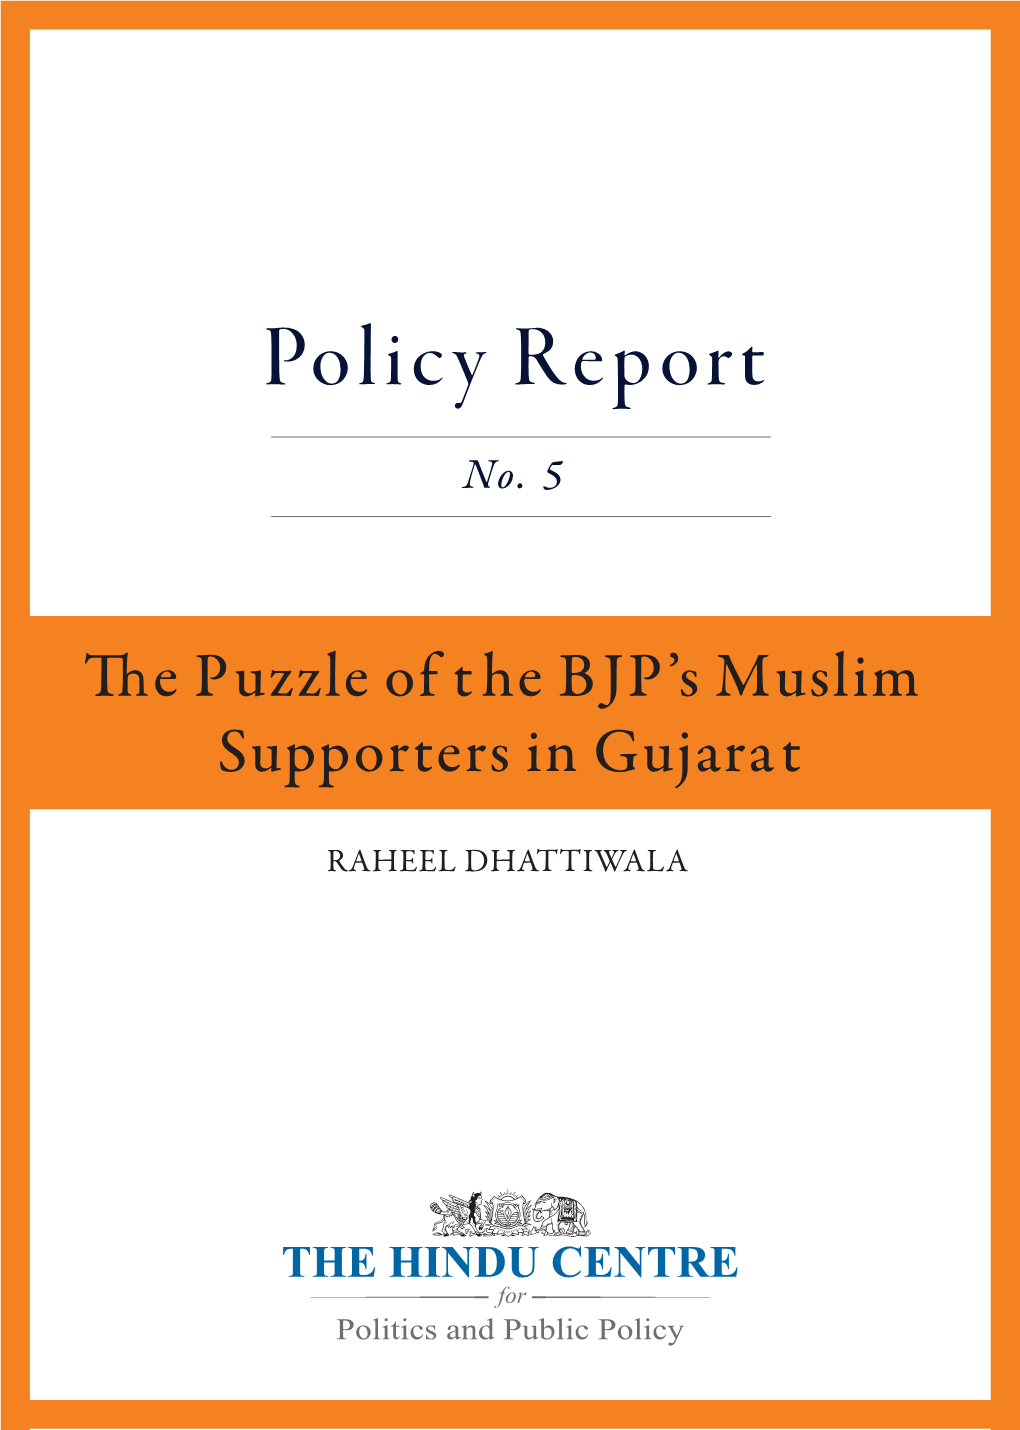 The Puzzle of the BJP's Muslim Supporters in Gujarat